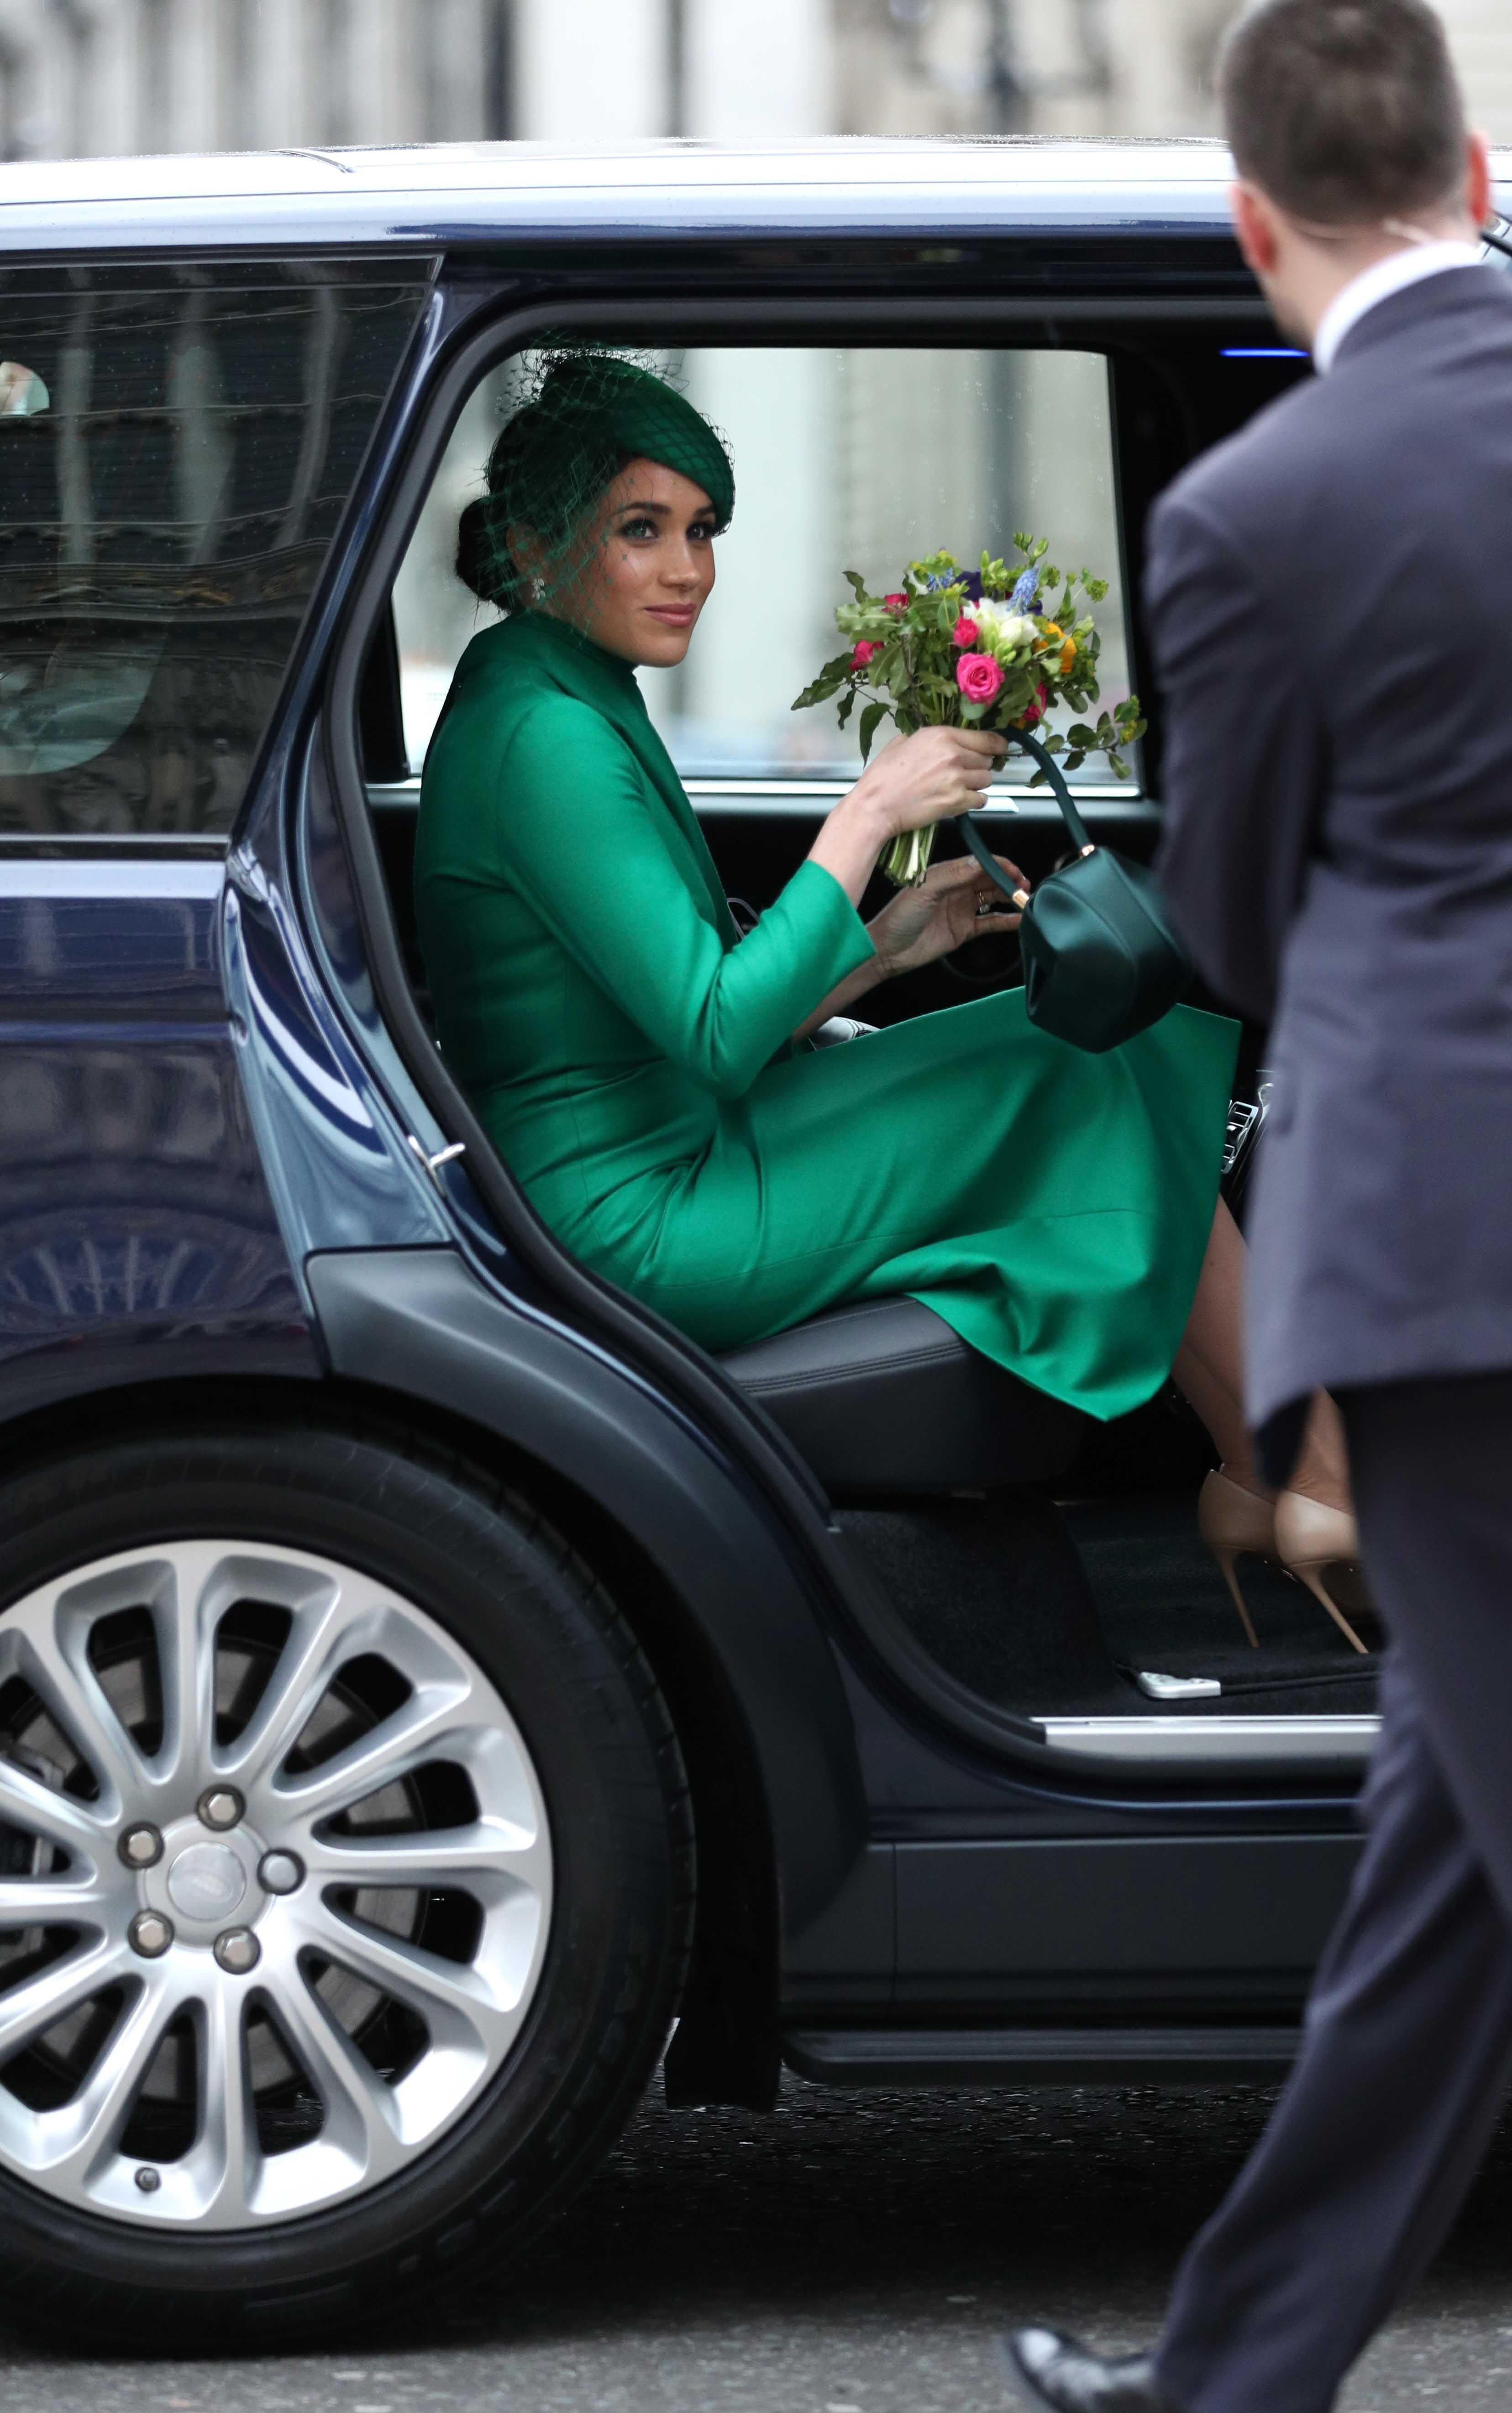 Duchess Meghan leaving after attending the Commonwealth Service at Westminster Abbey, London March 9, 2020. | Photo: Getty Images